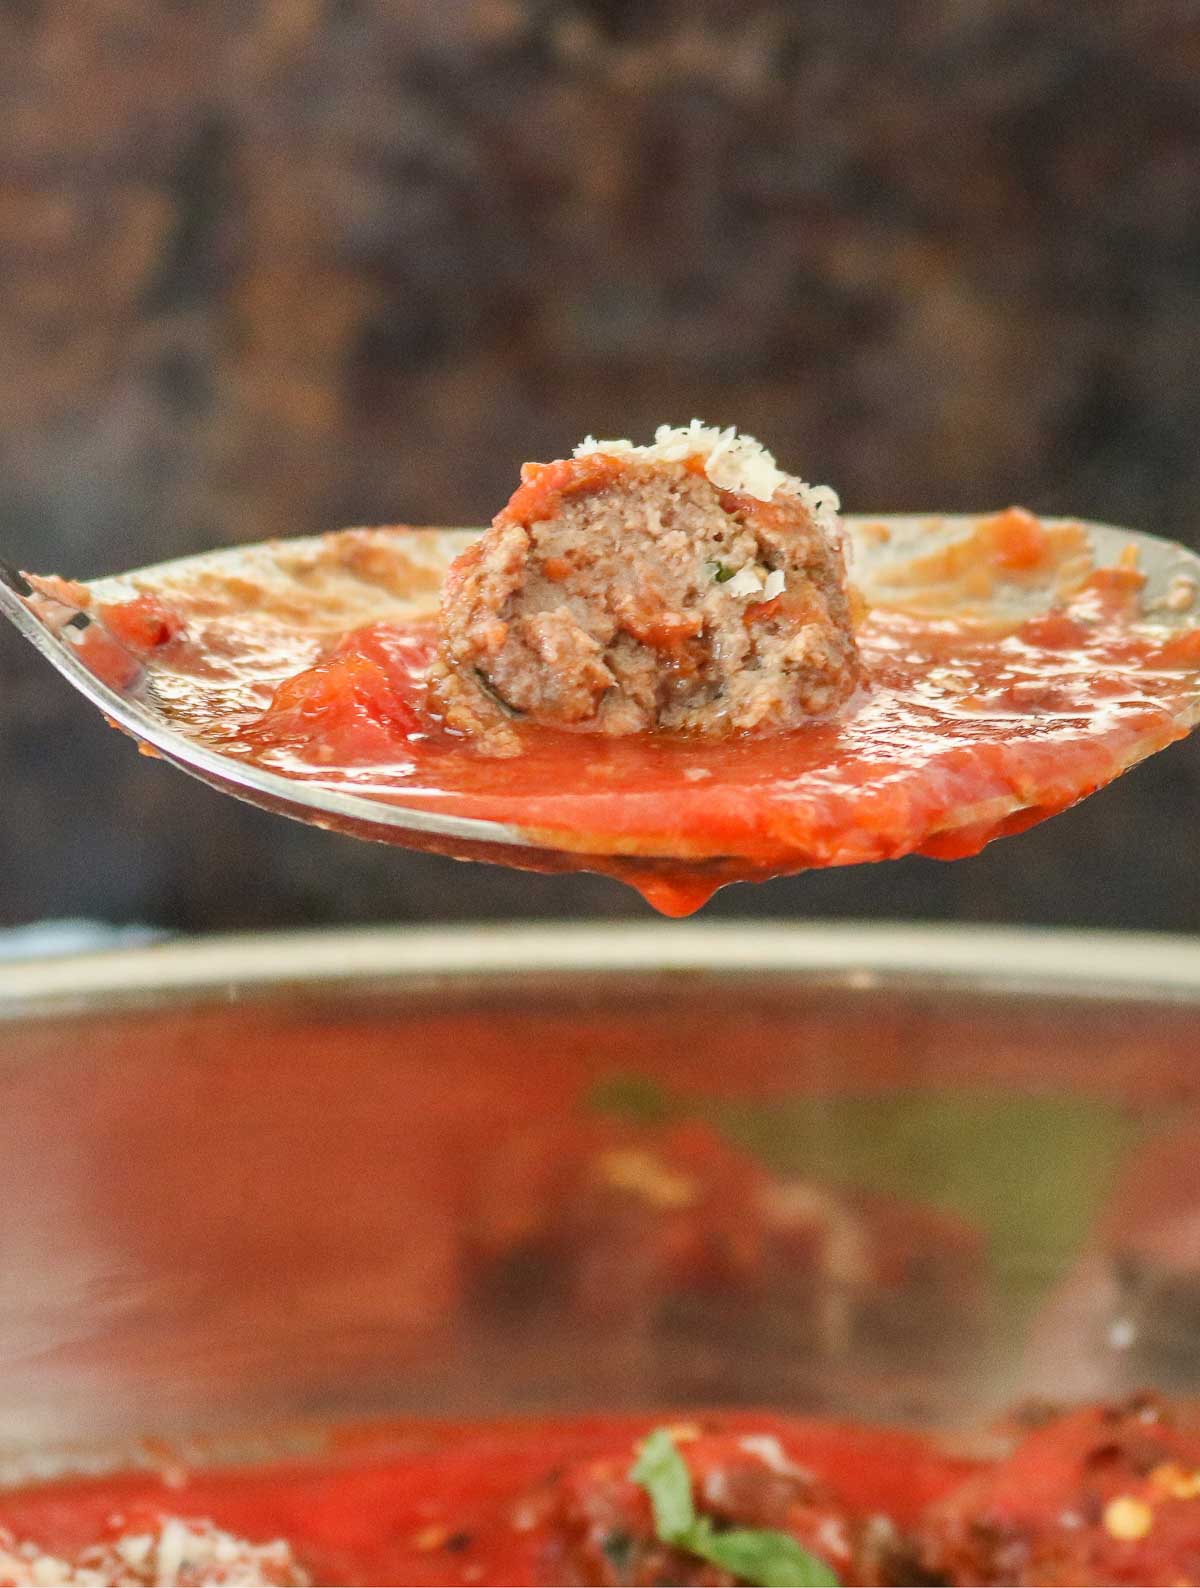 Homemade meatball and sauce on a serving spoon.